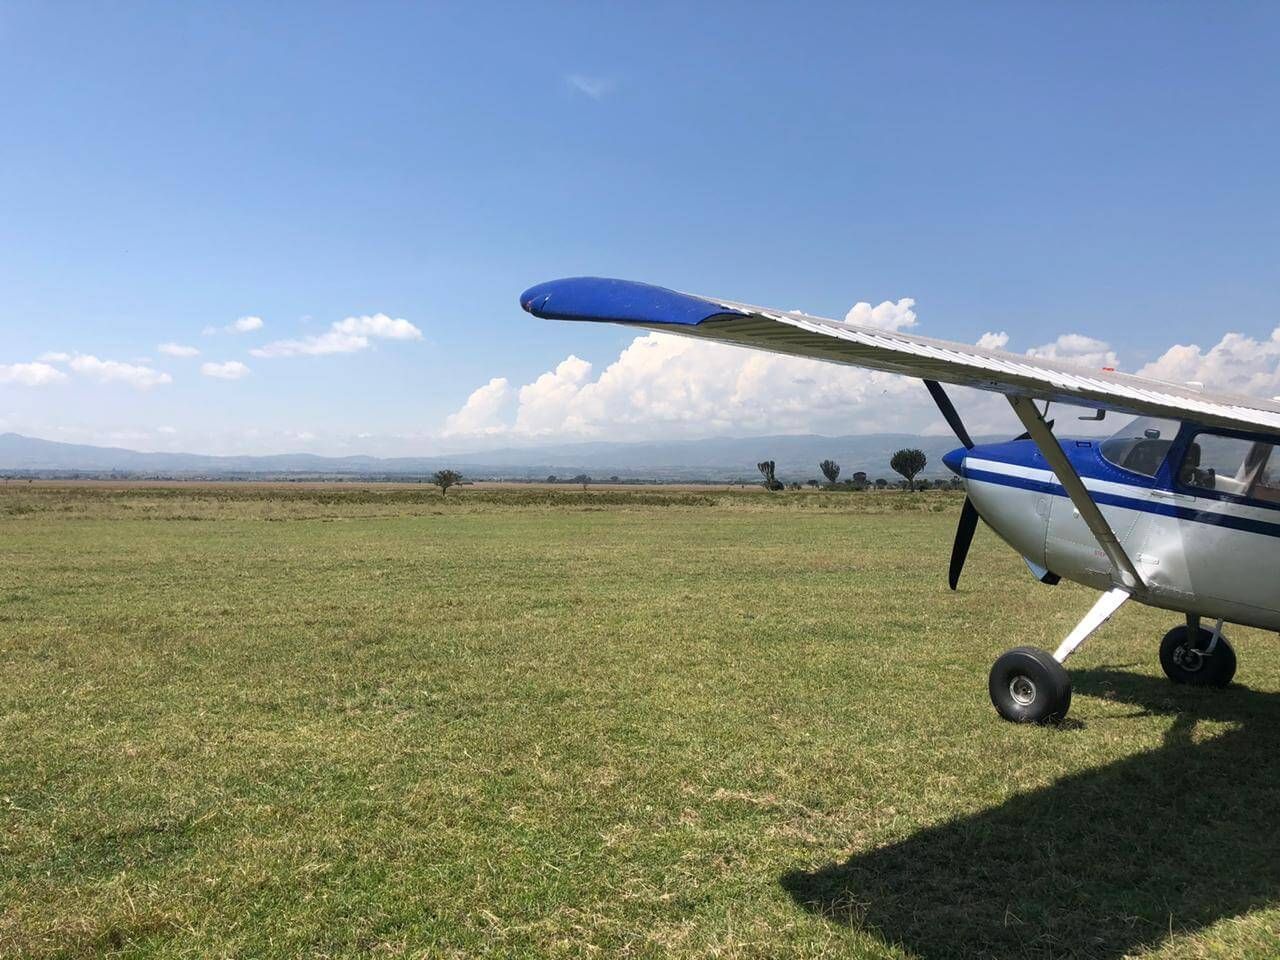 A small plane is parked in a grassy field.